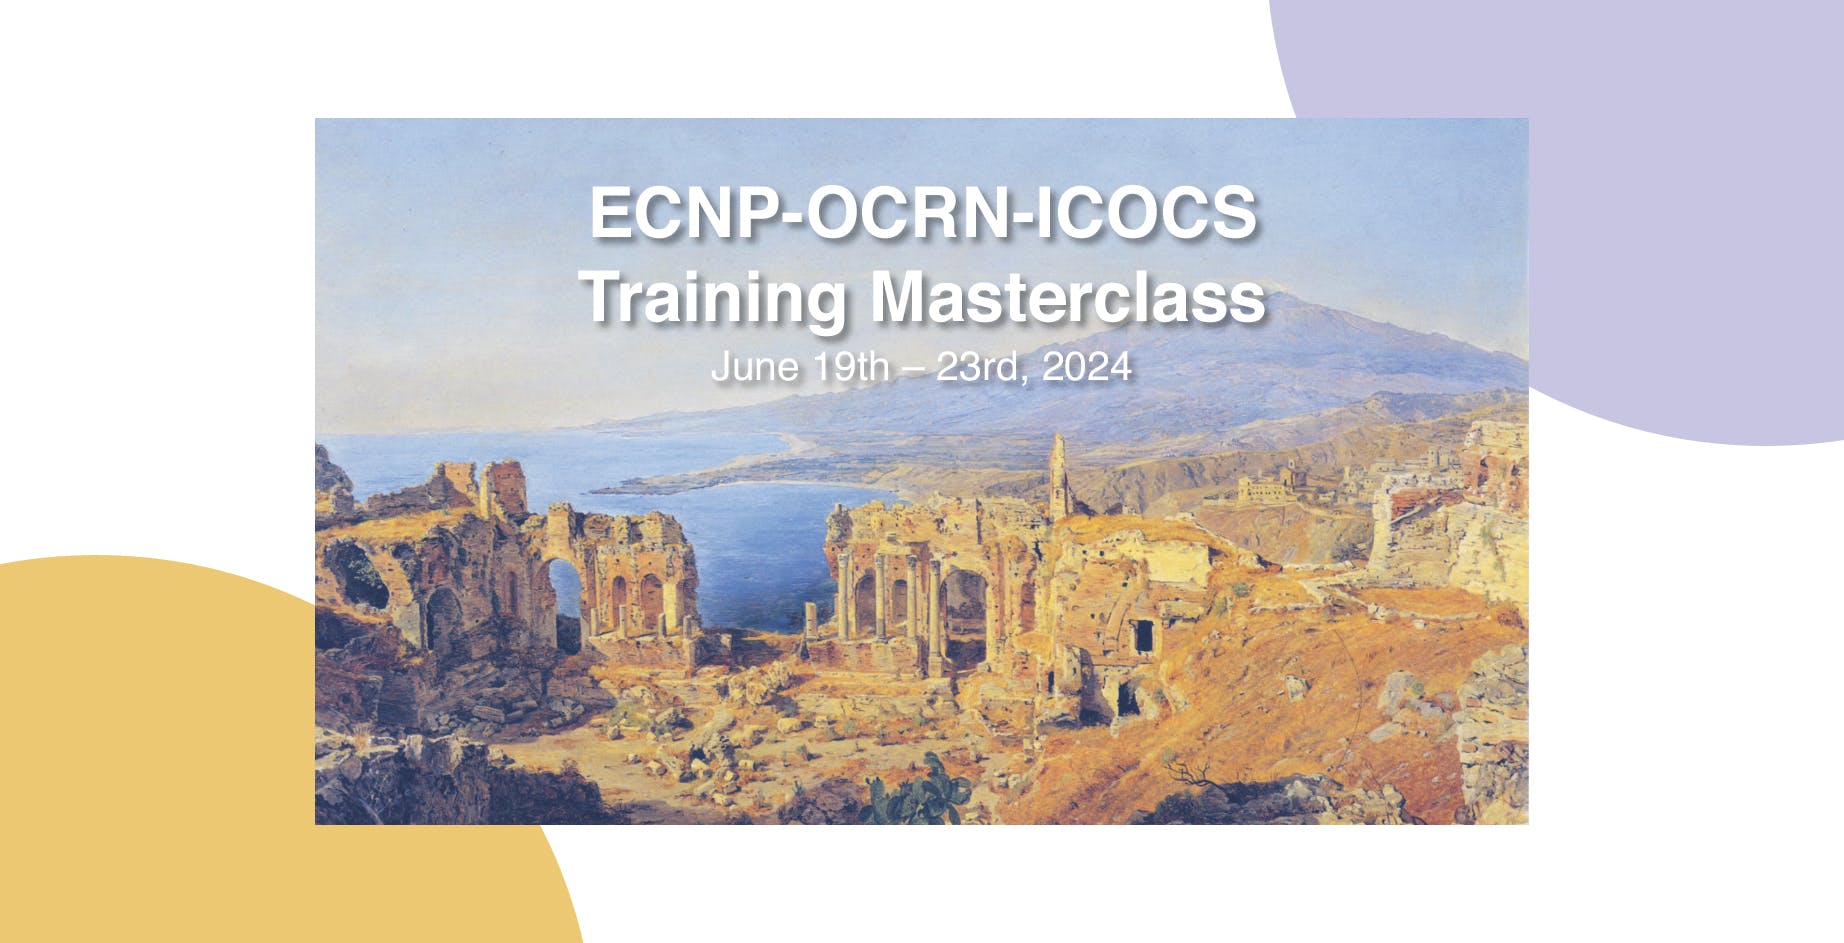 Poster of the 2024 ECNP-OCRN-ICOCS training masterclass: a picture of the Taormina ruins on a white background with an overlay text: "ECNP-OCRN-ICOCS Training Masterclass: June 19th - 23rd, 2024"